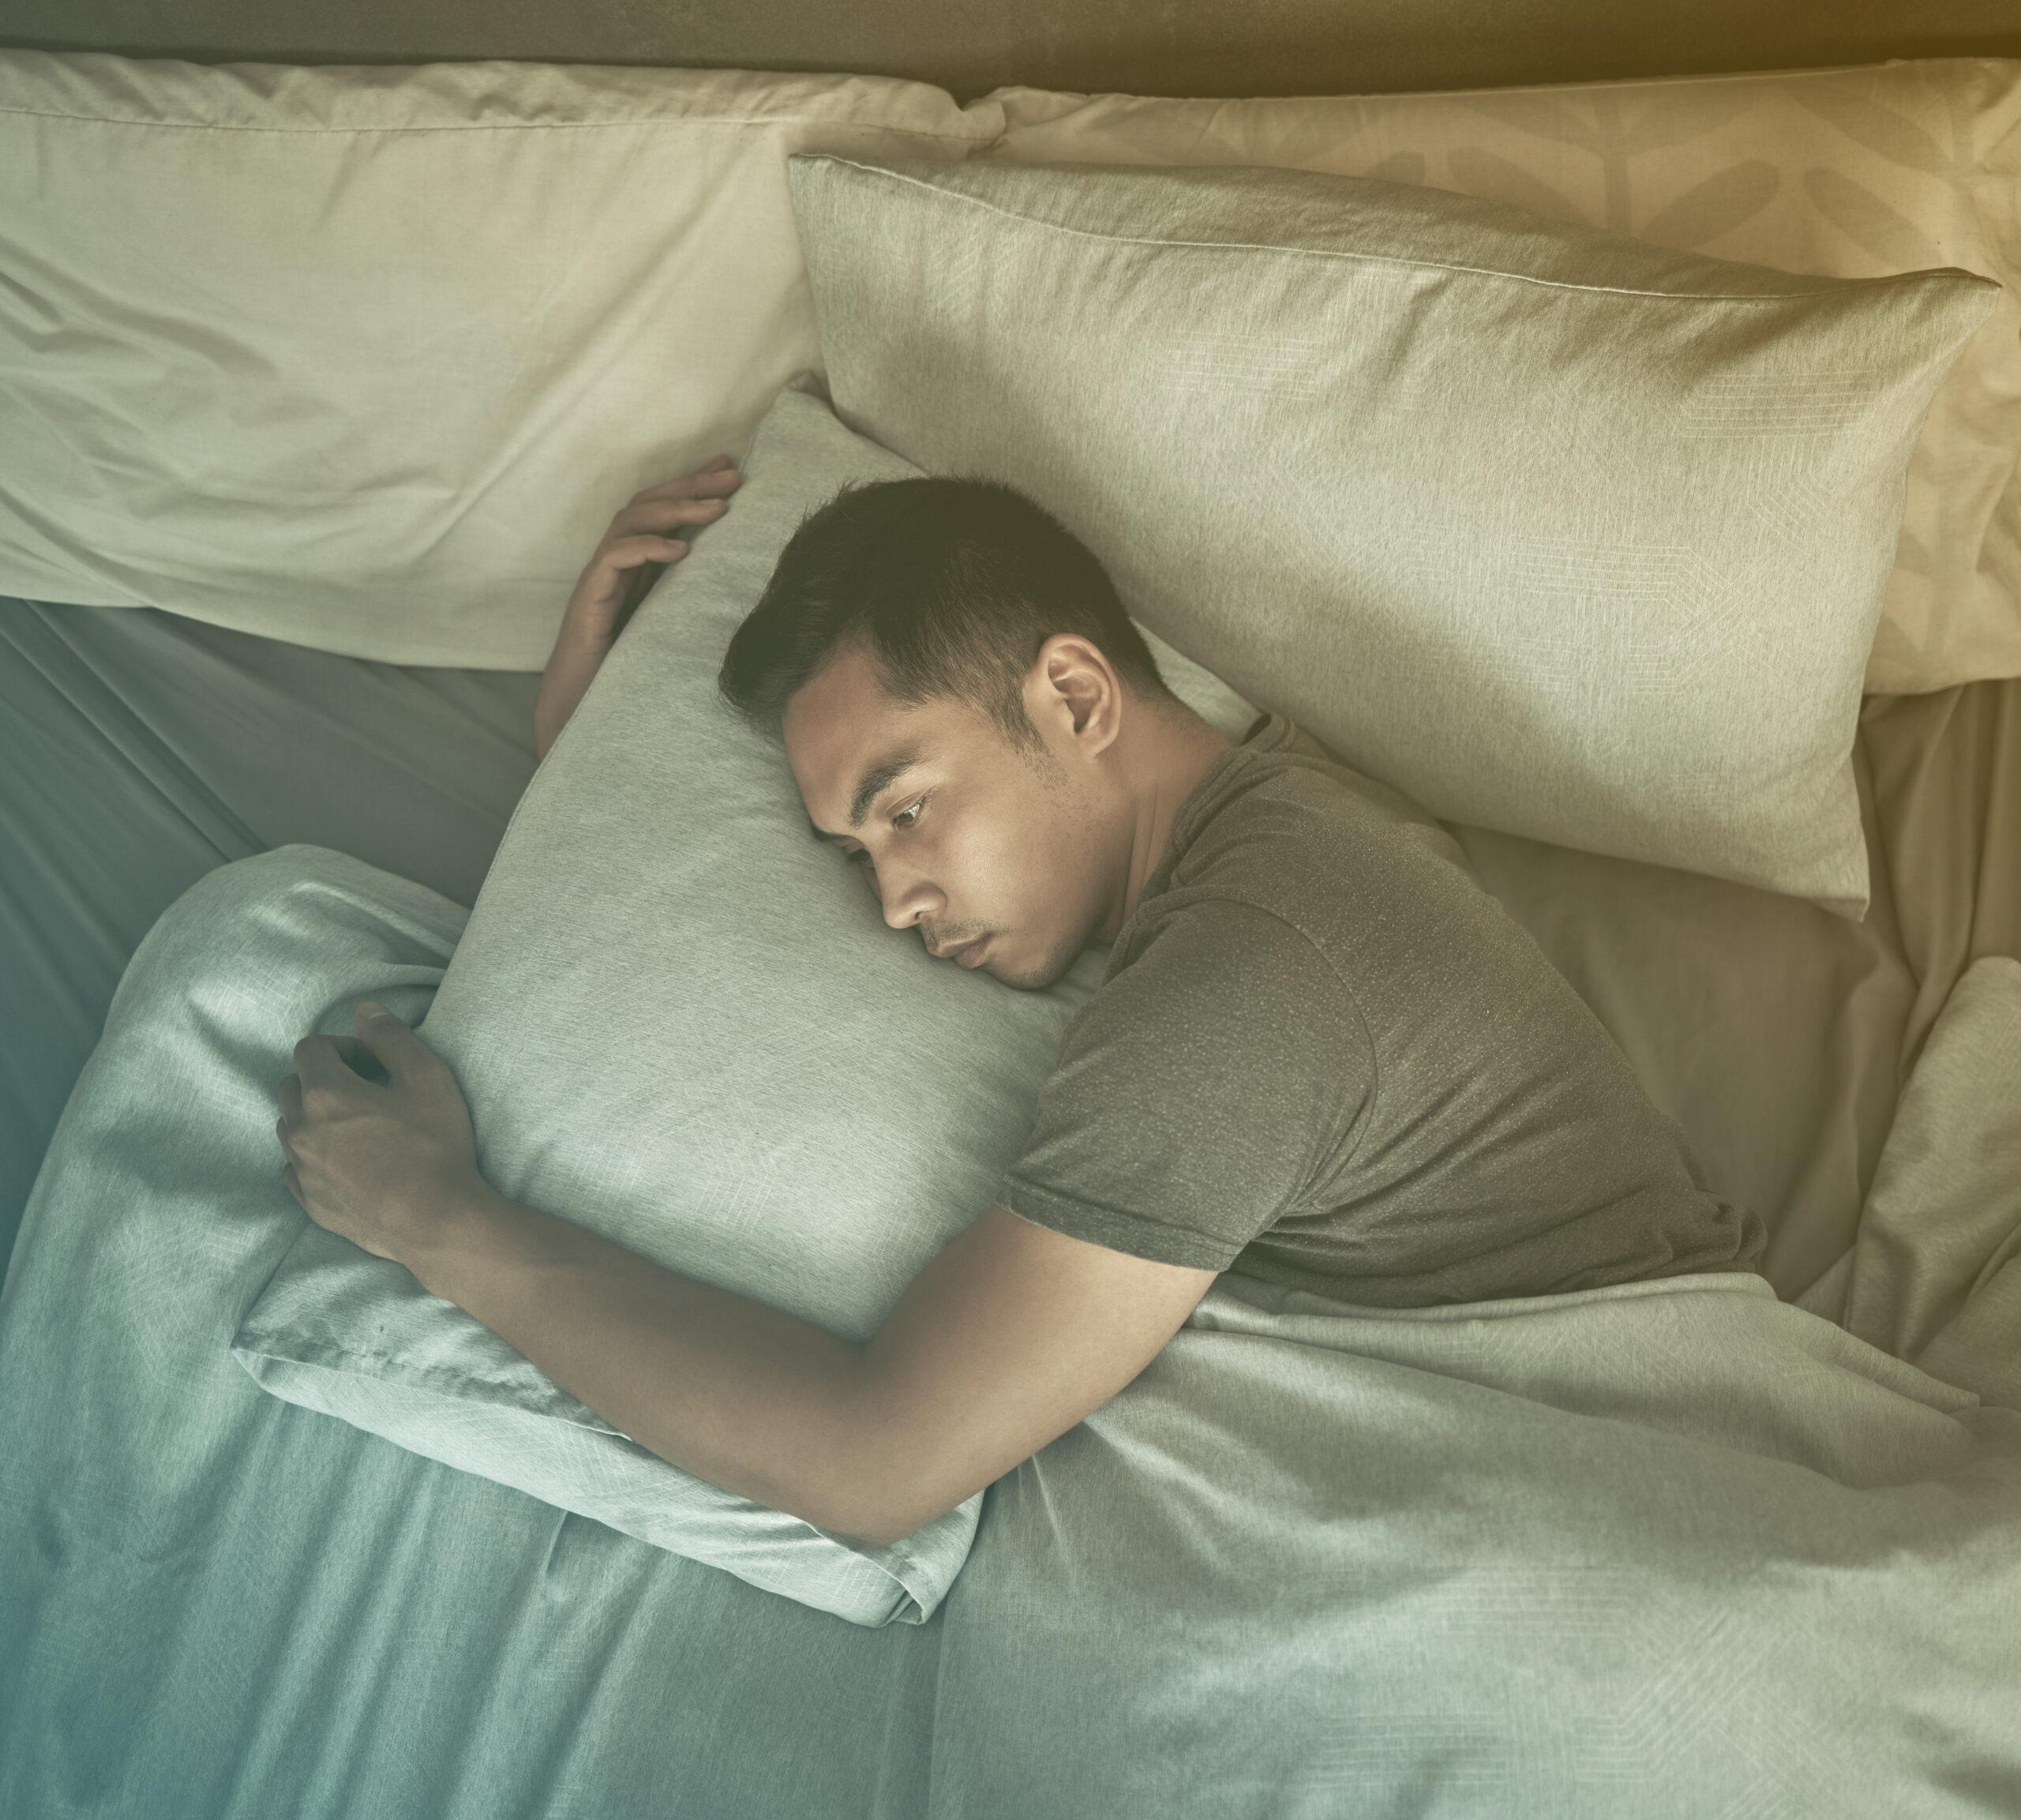 Learn more about snoring and sleep apnea